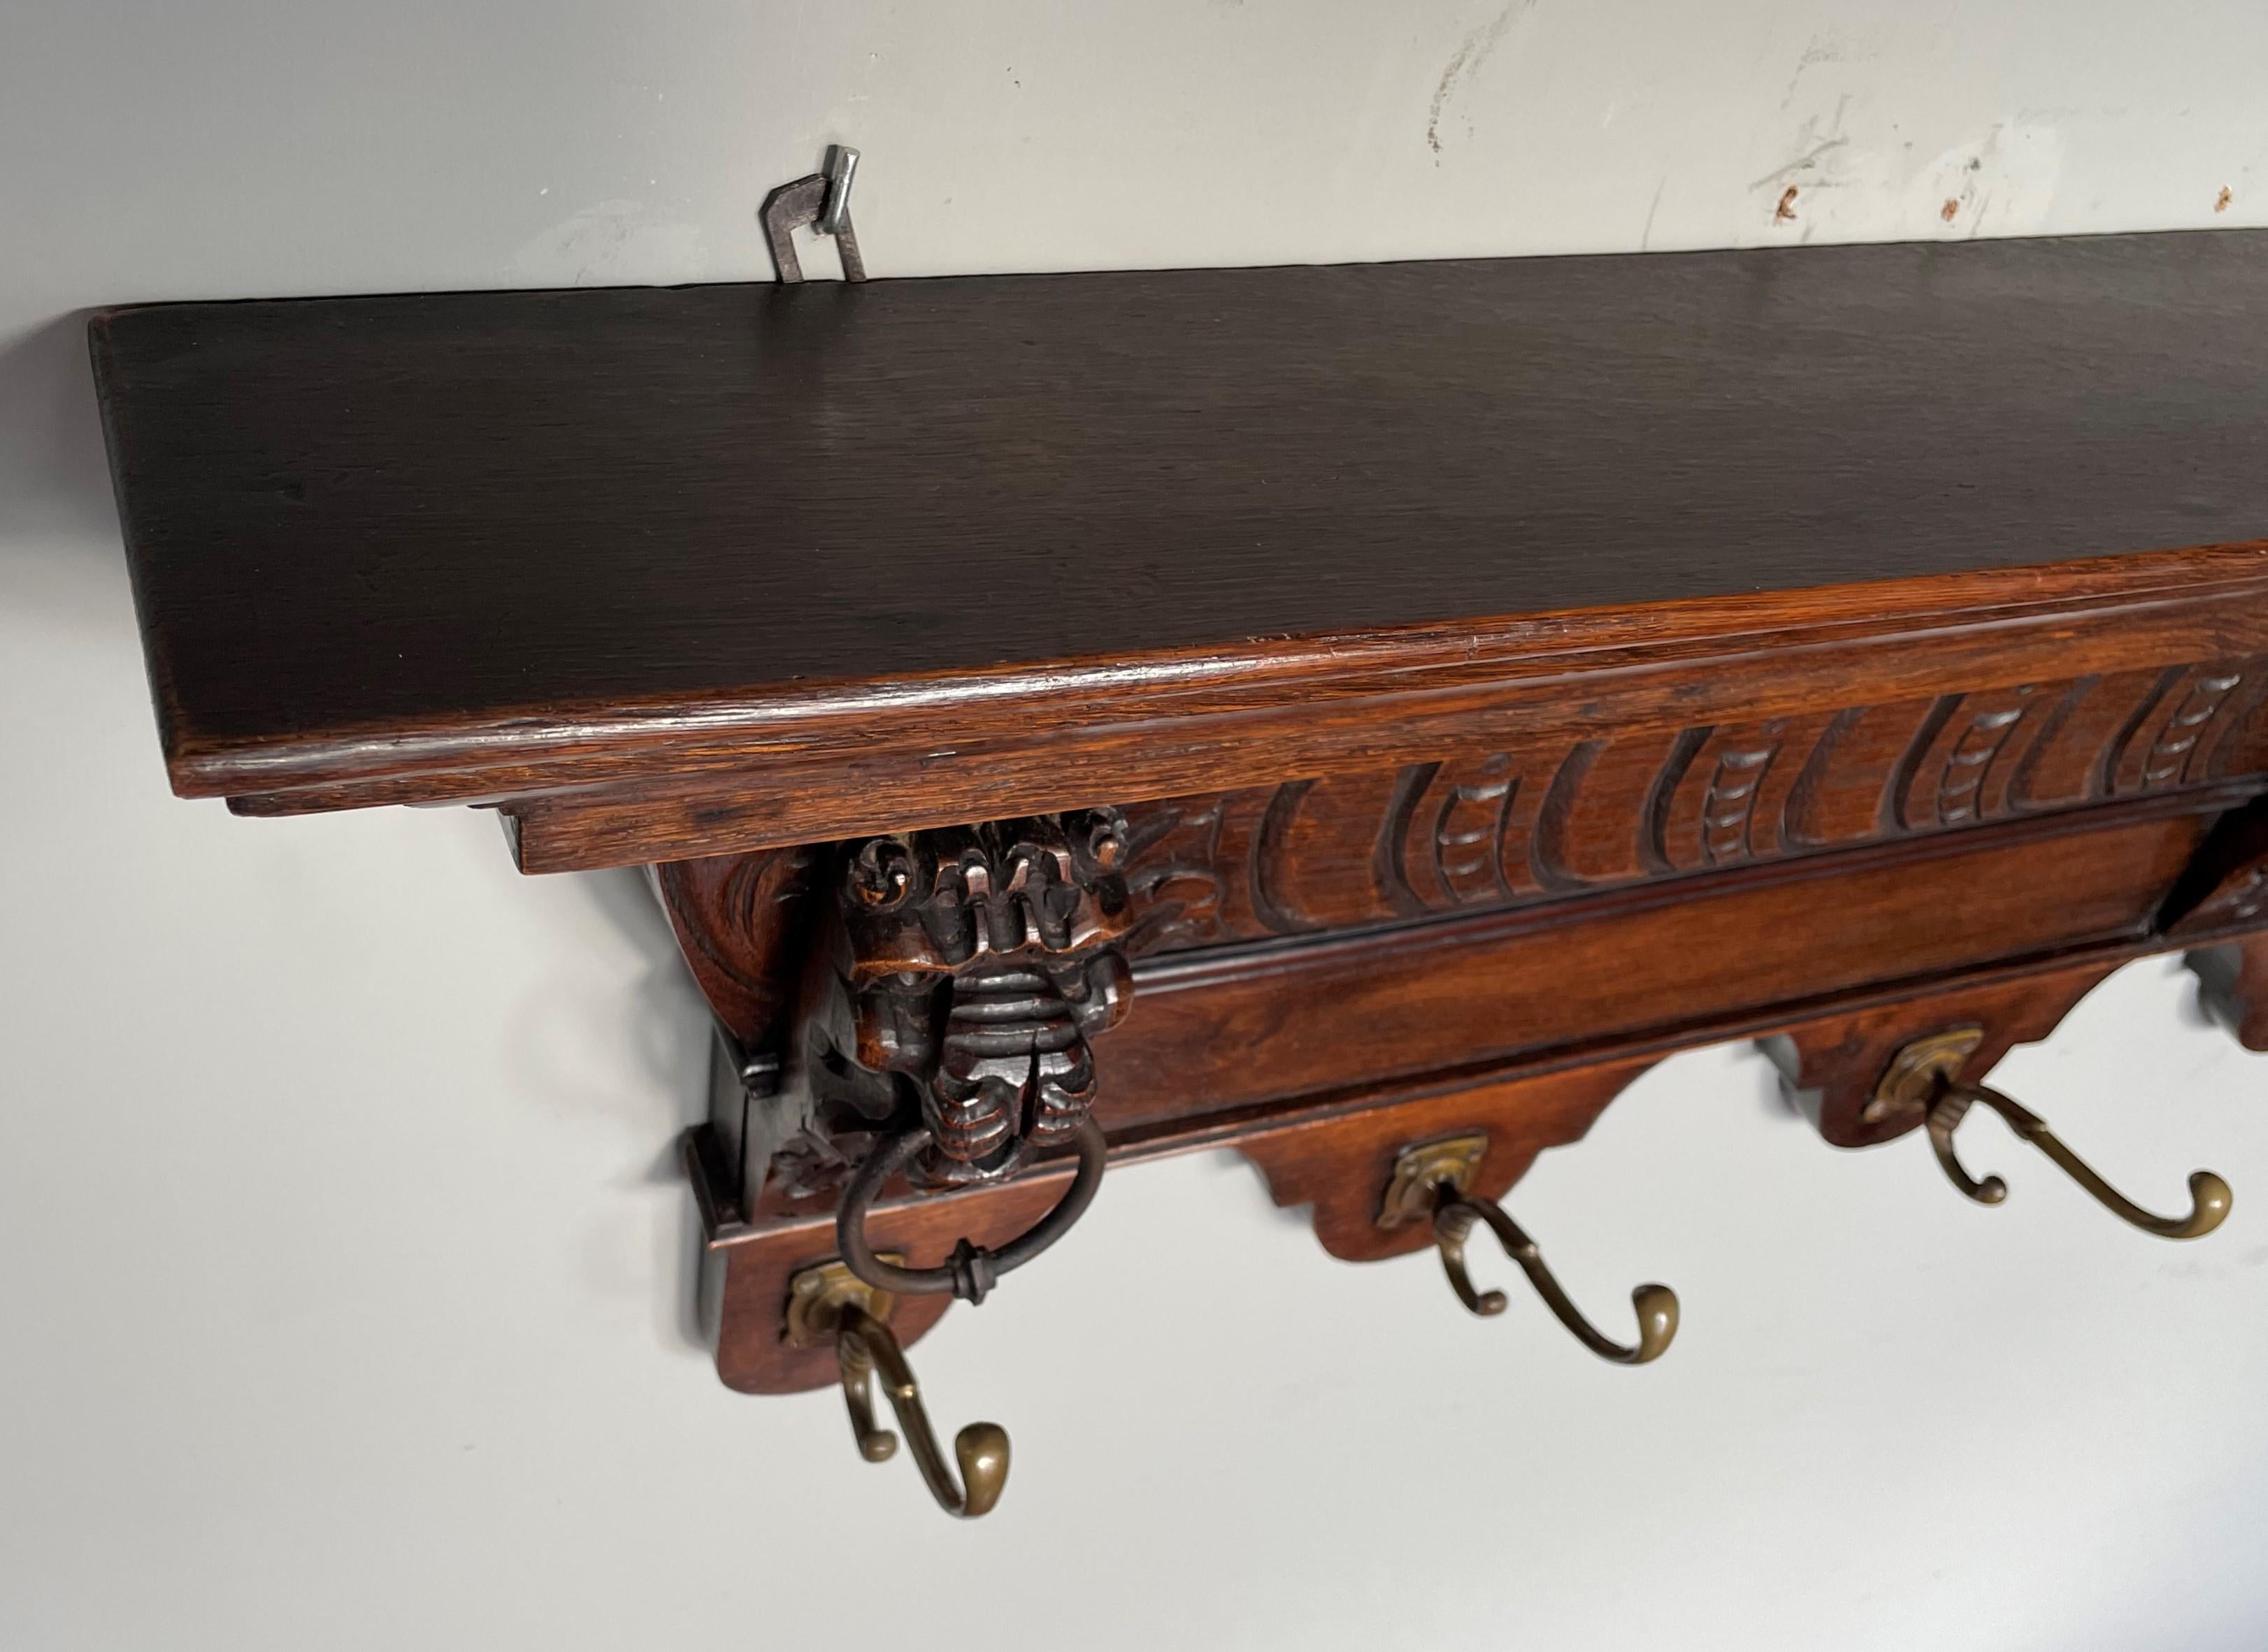 20th Century Antique Hand Carved Renaissance Revival Wall Coat Rack with Lion Mask Sculptures